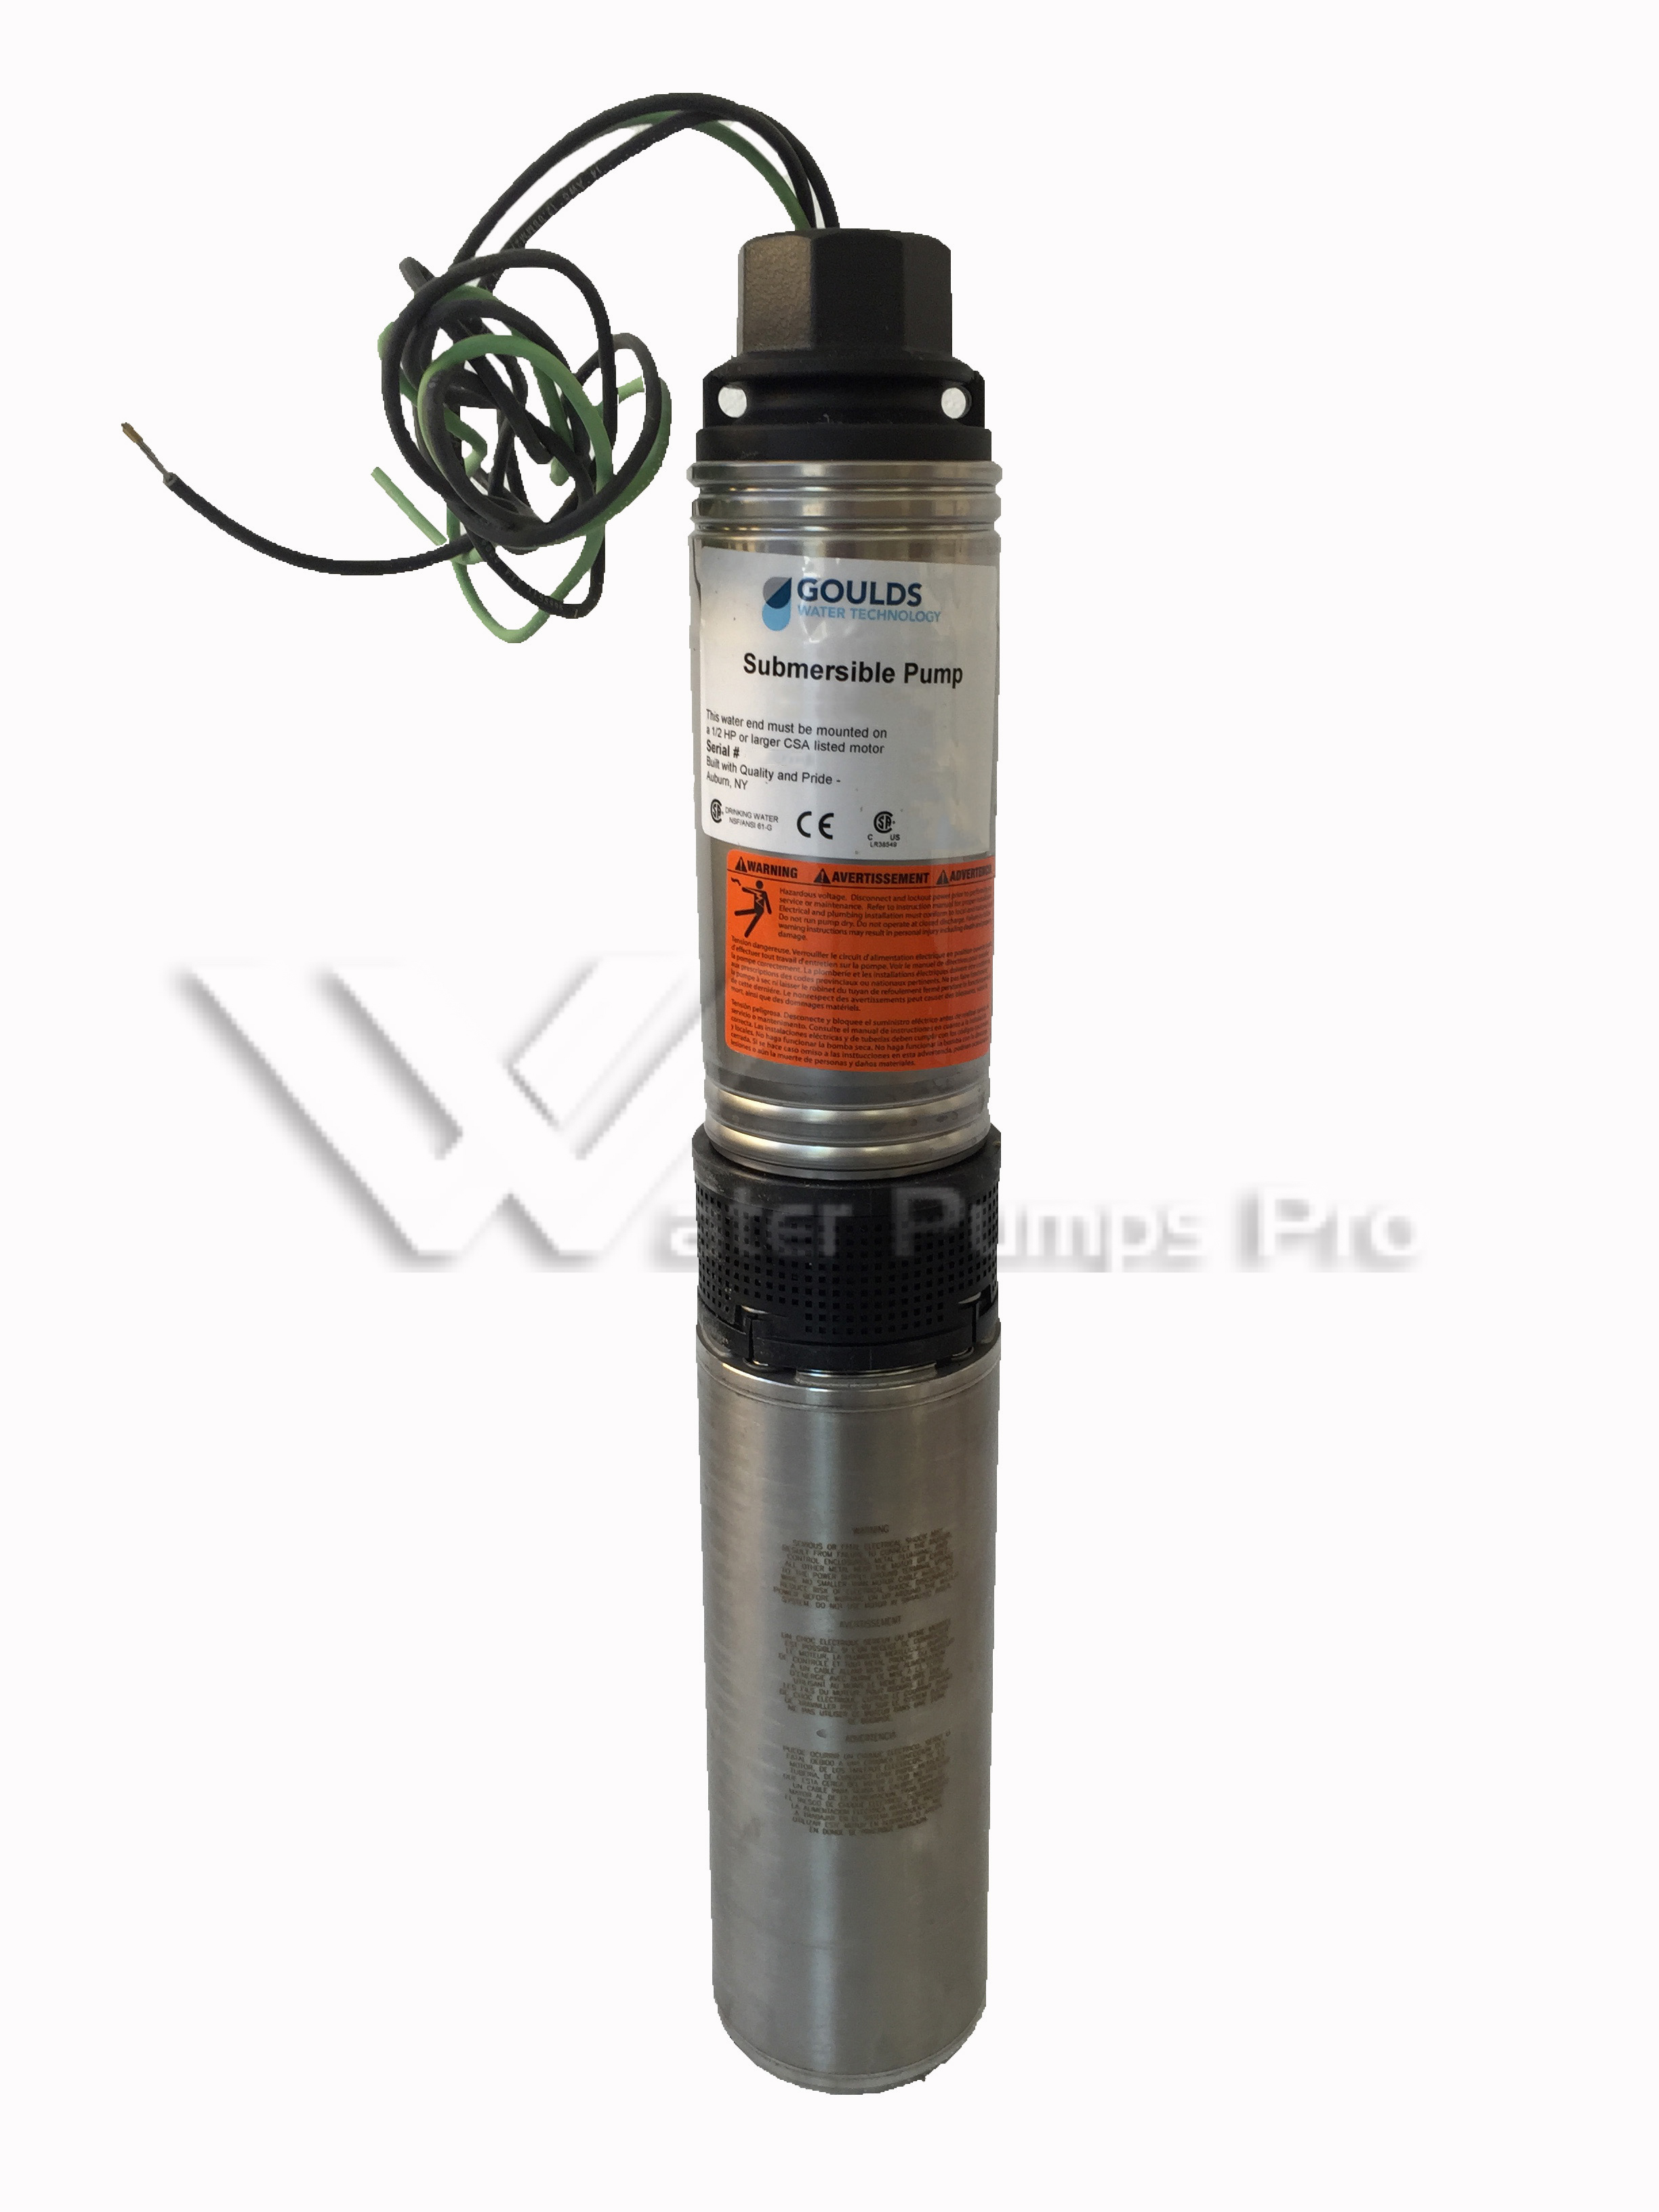 Goulds 10HS05421C Submersible Water Well Pump 1/2HP 115V 2Wire